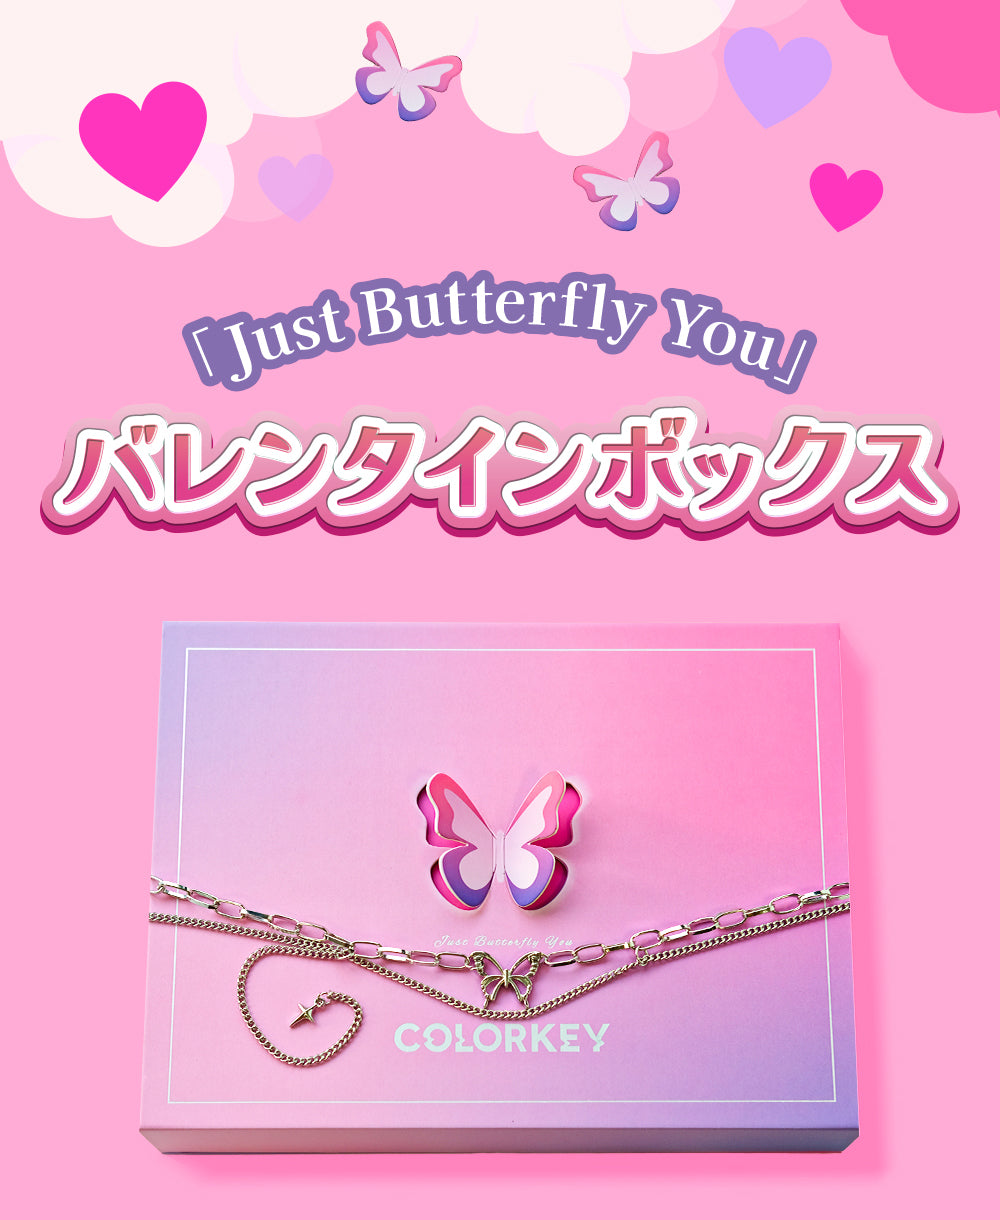 COLORKEY 2024バレンタイン限定コレクション 「Just Butterfly You」コスメギフトボックス リップメイク 数量限定 特典贈呈品付き